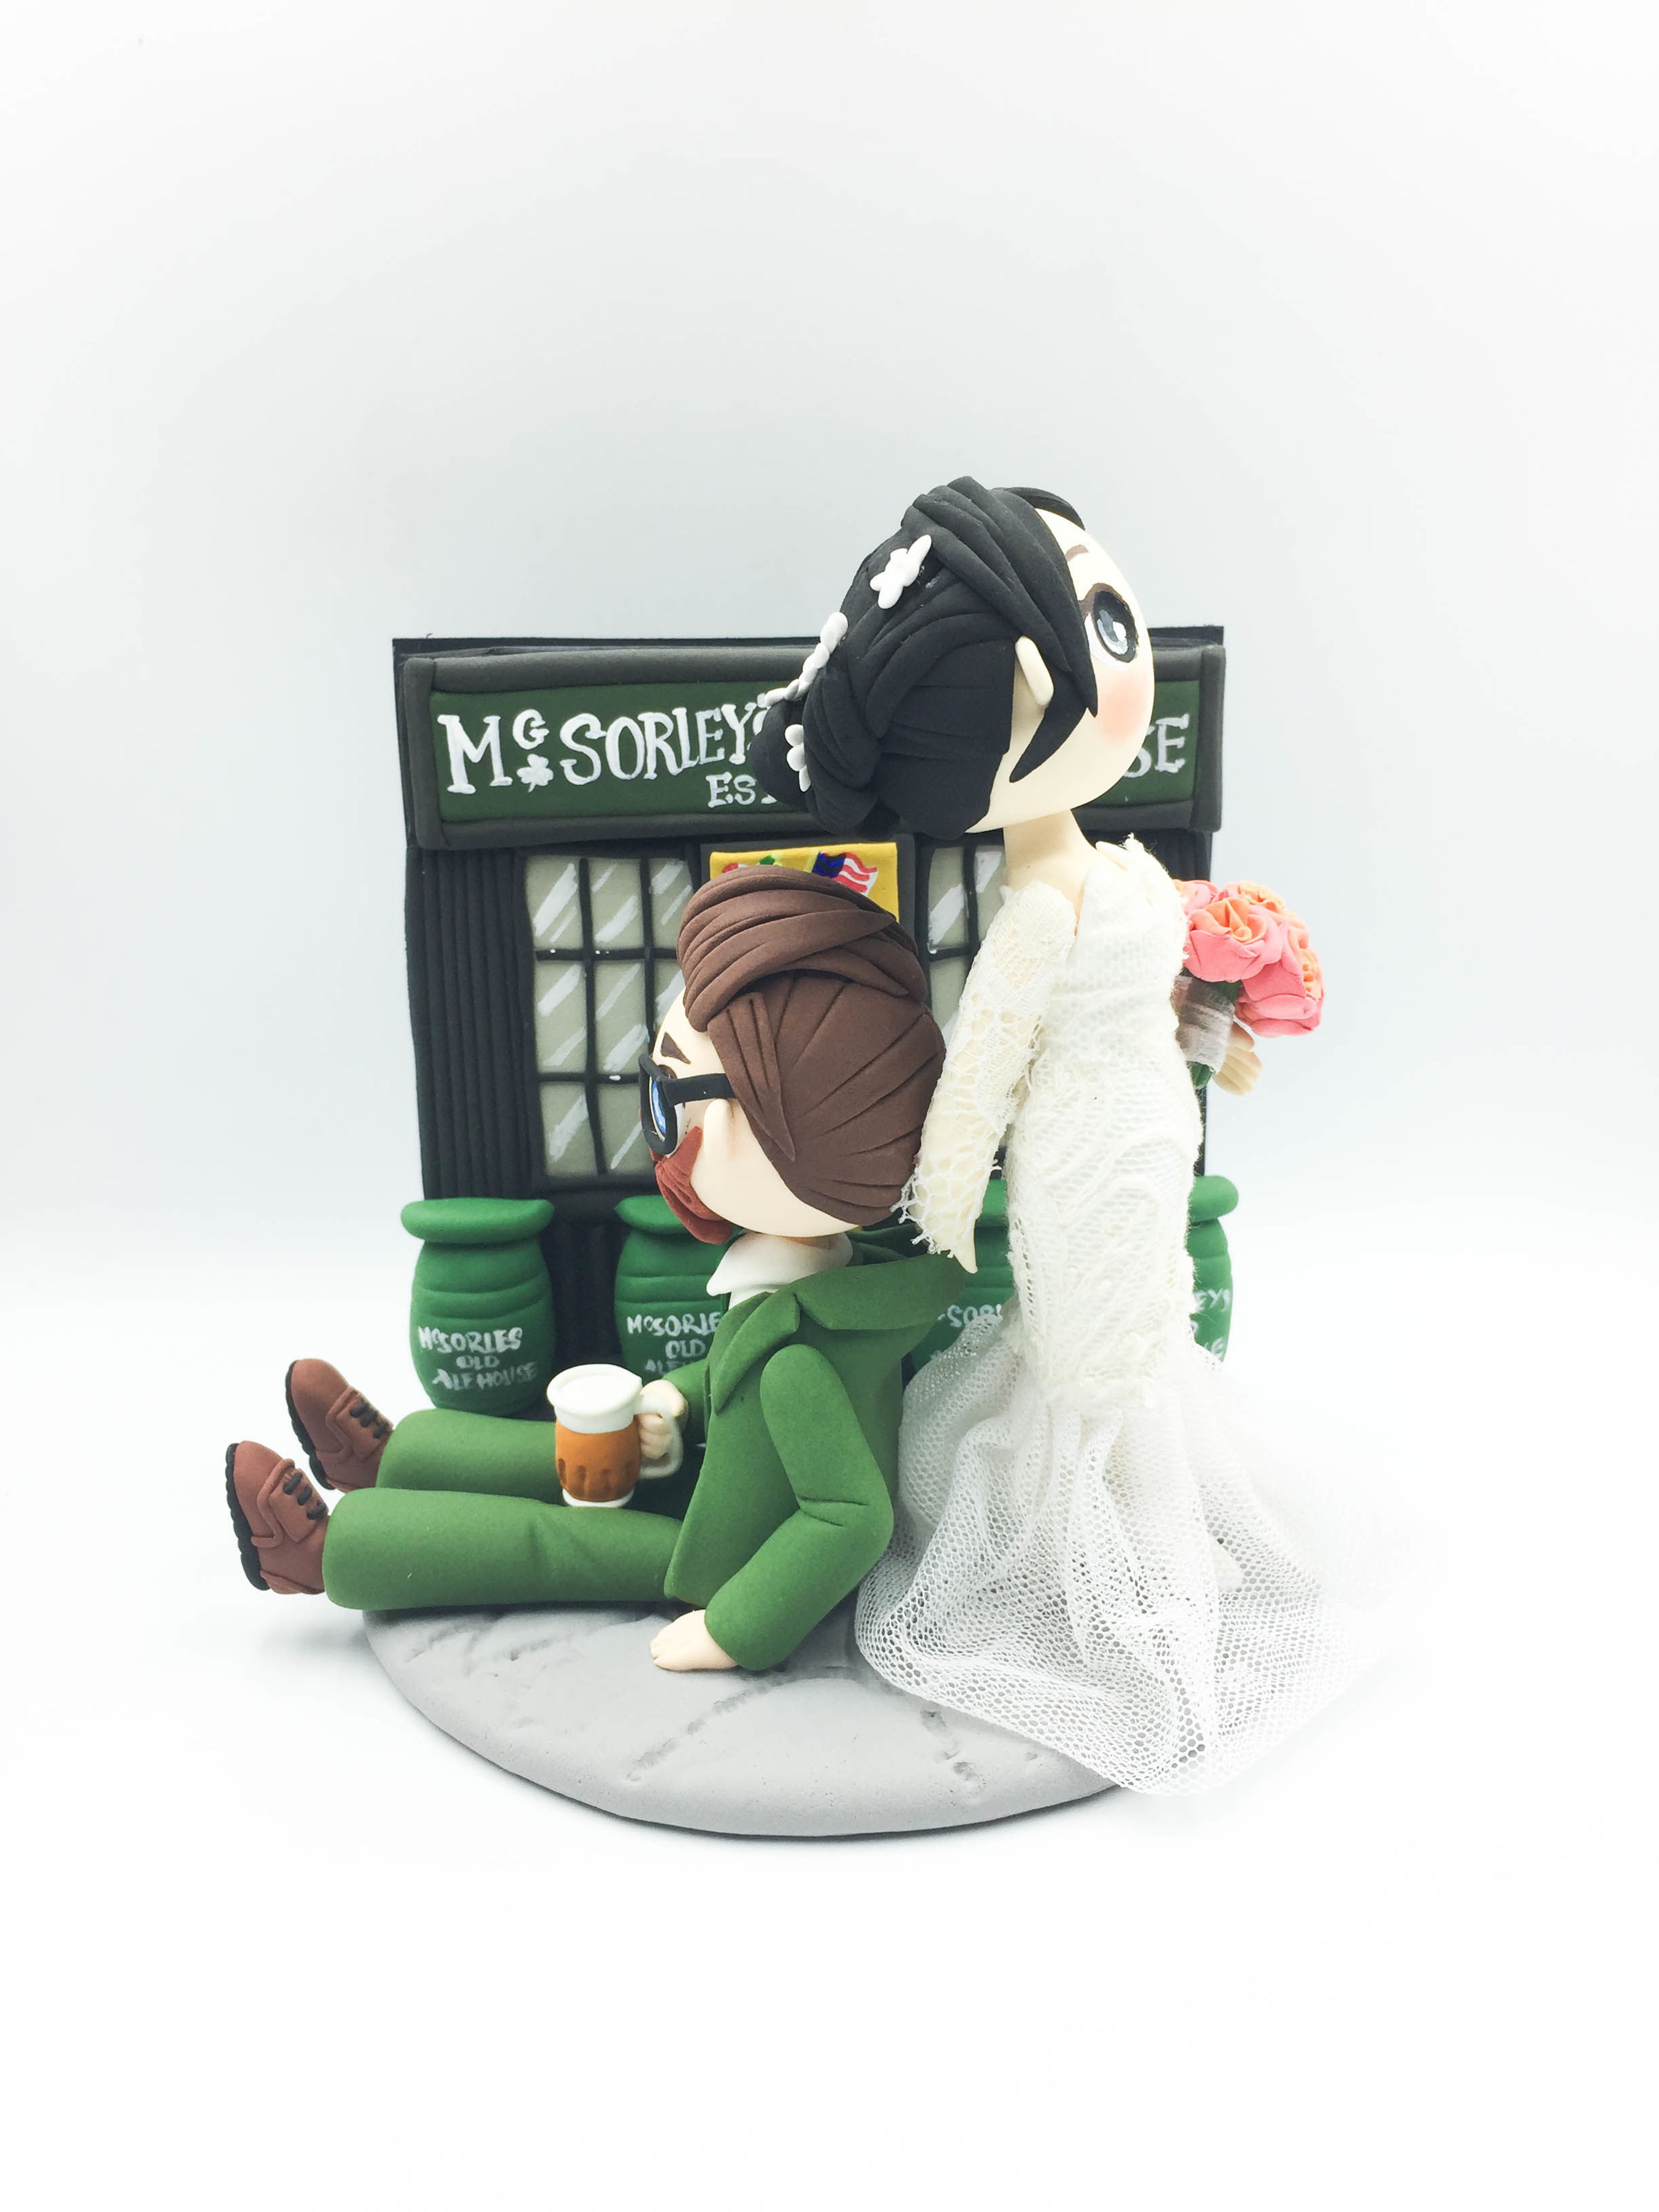 Picture of Funny bride & groom wedding cake topper, Mc Sorley's Old Ale House Wedding Cake Topper